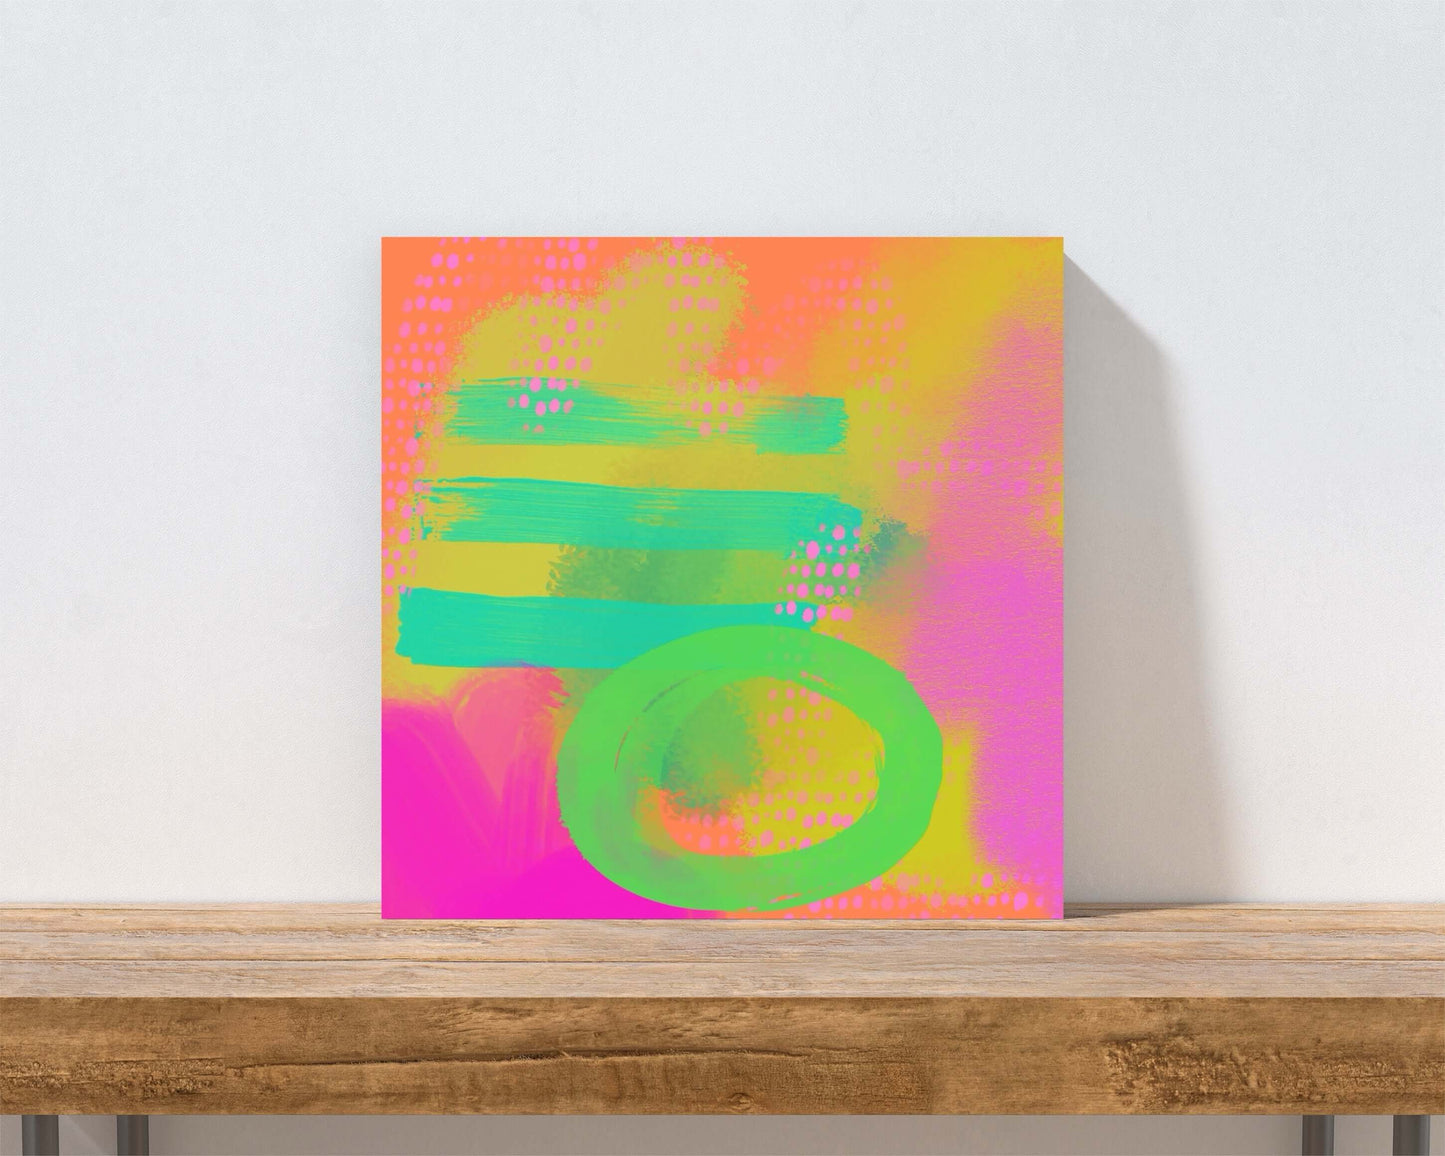 Bright Green, Orange and Pink “Hopscotch” Abstract Art Canvas Print Wall Art Small Canvas on Shelf